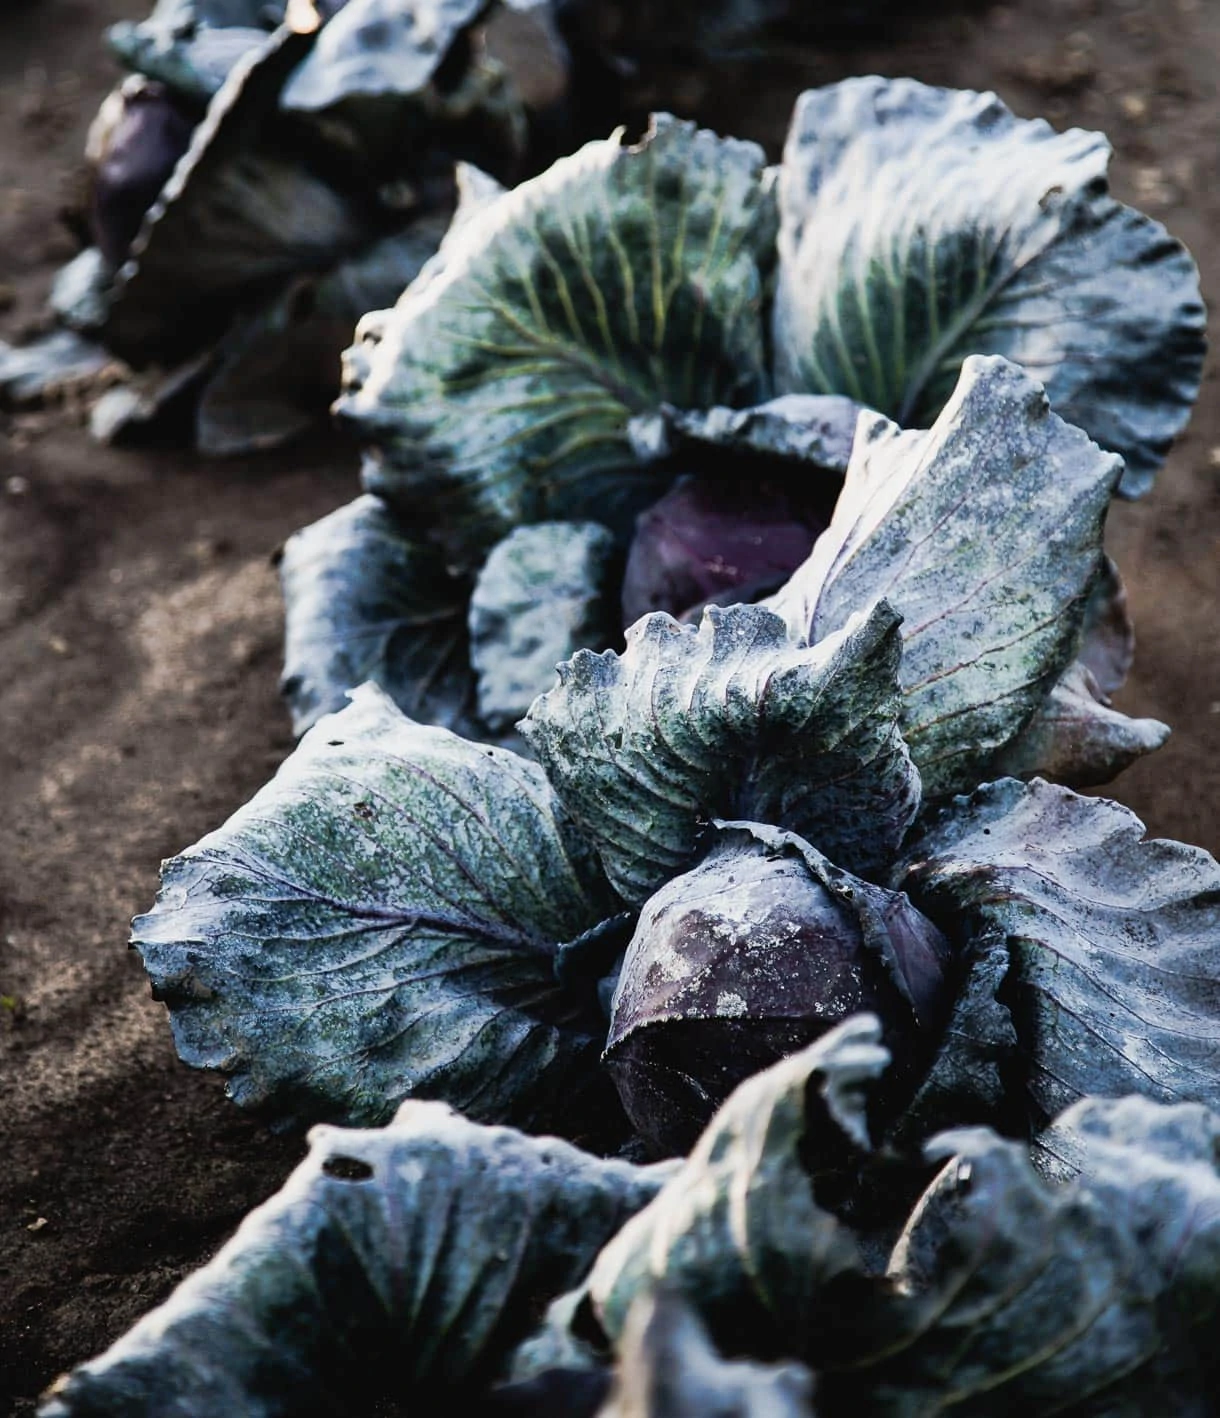 Purple cabbage growing